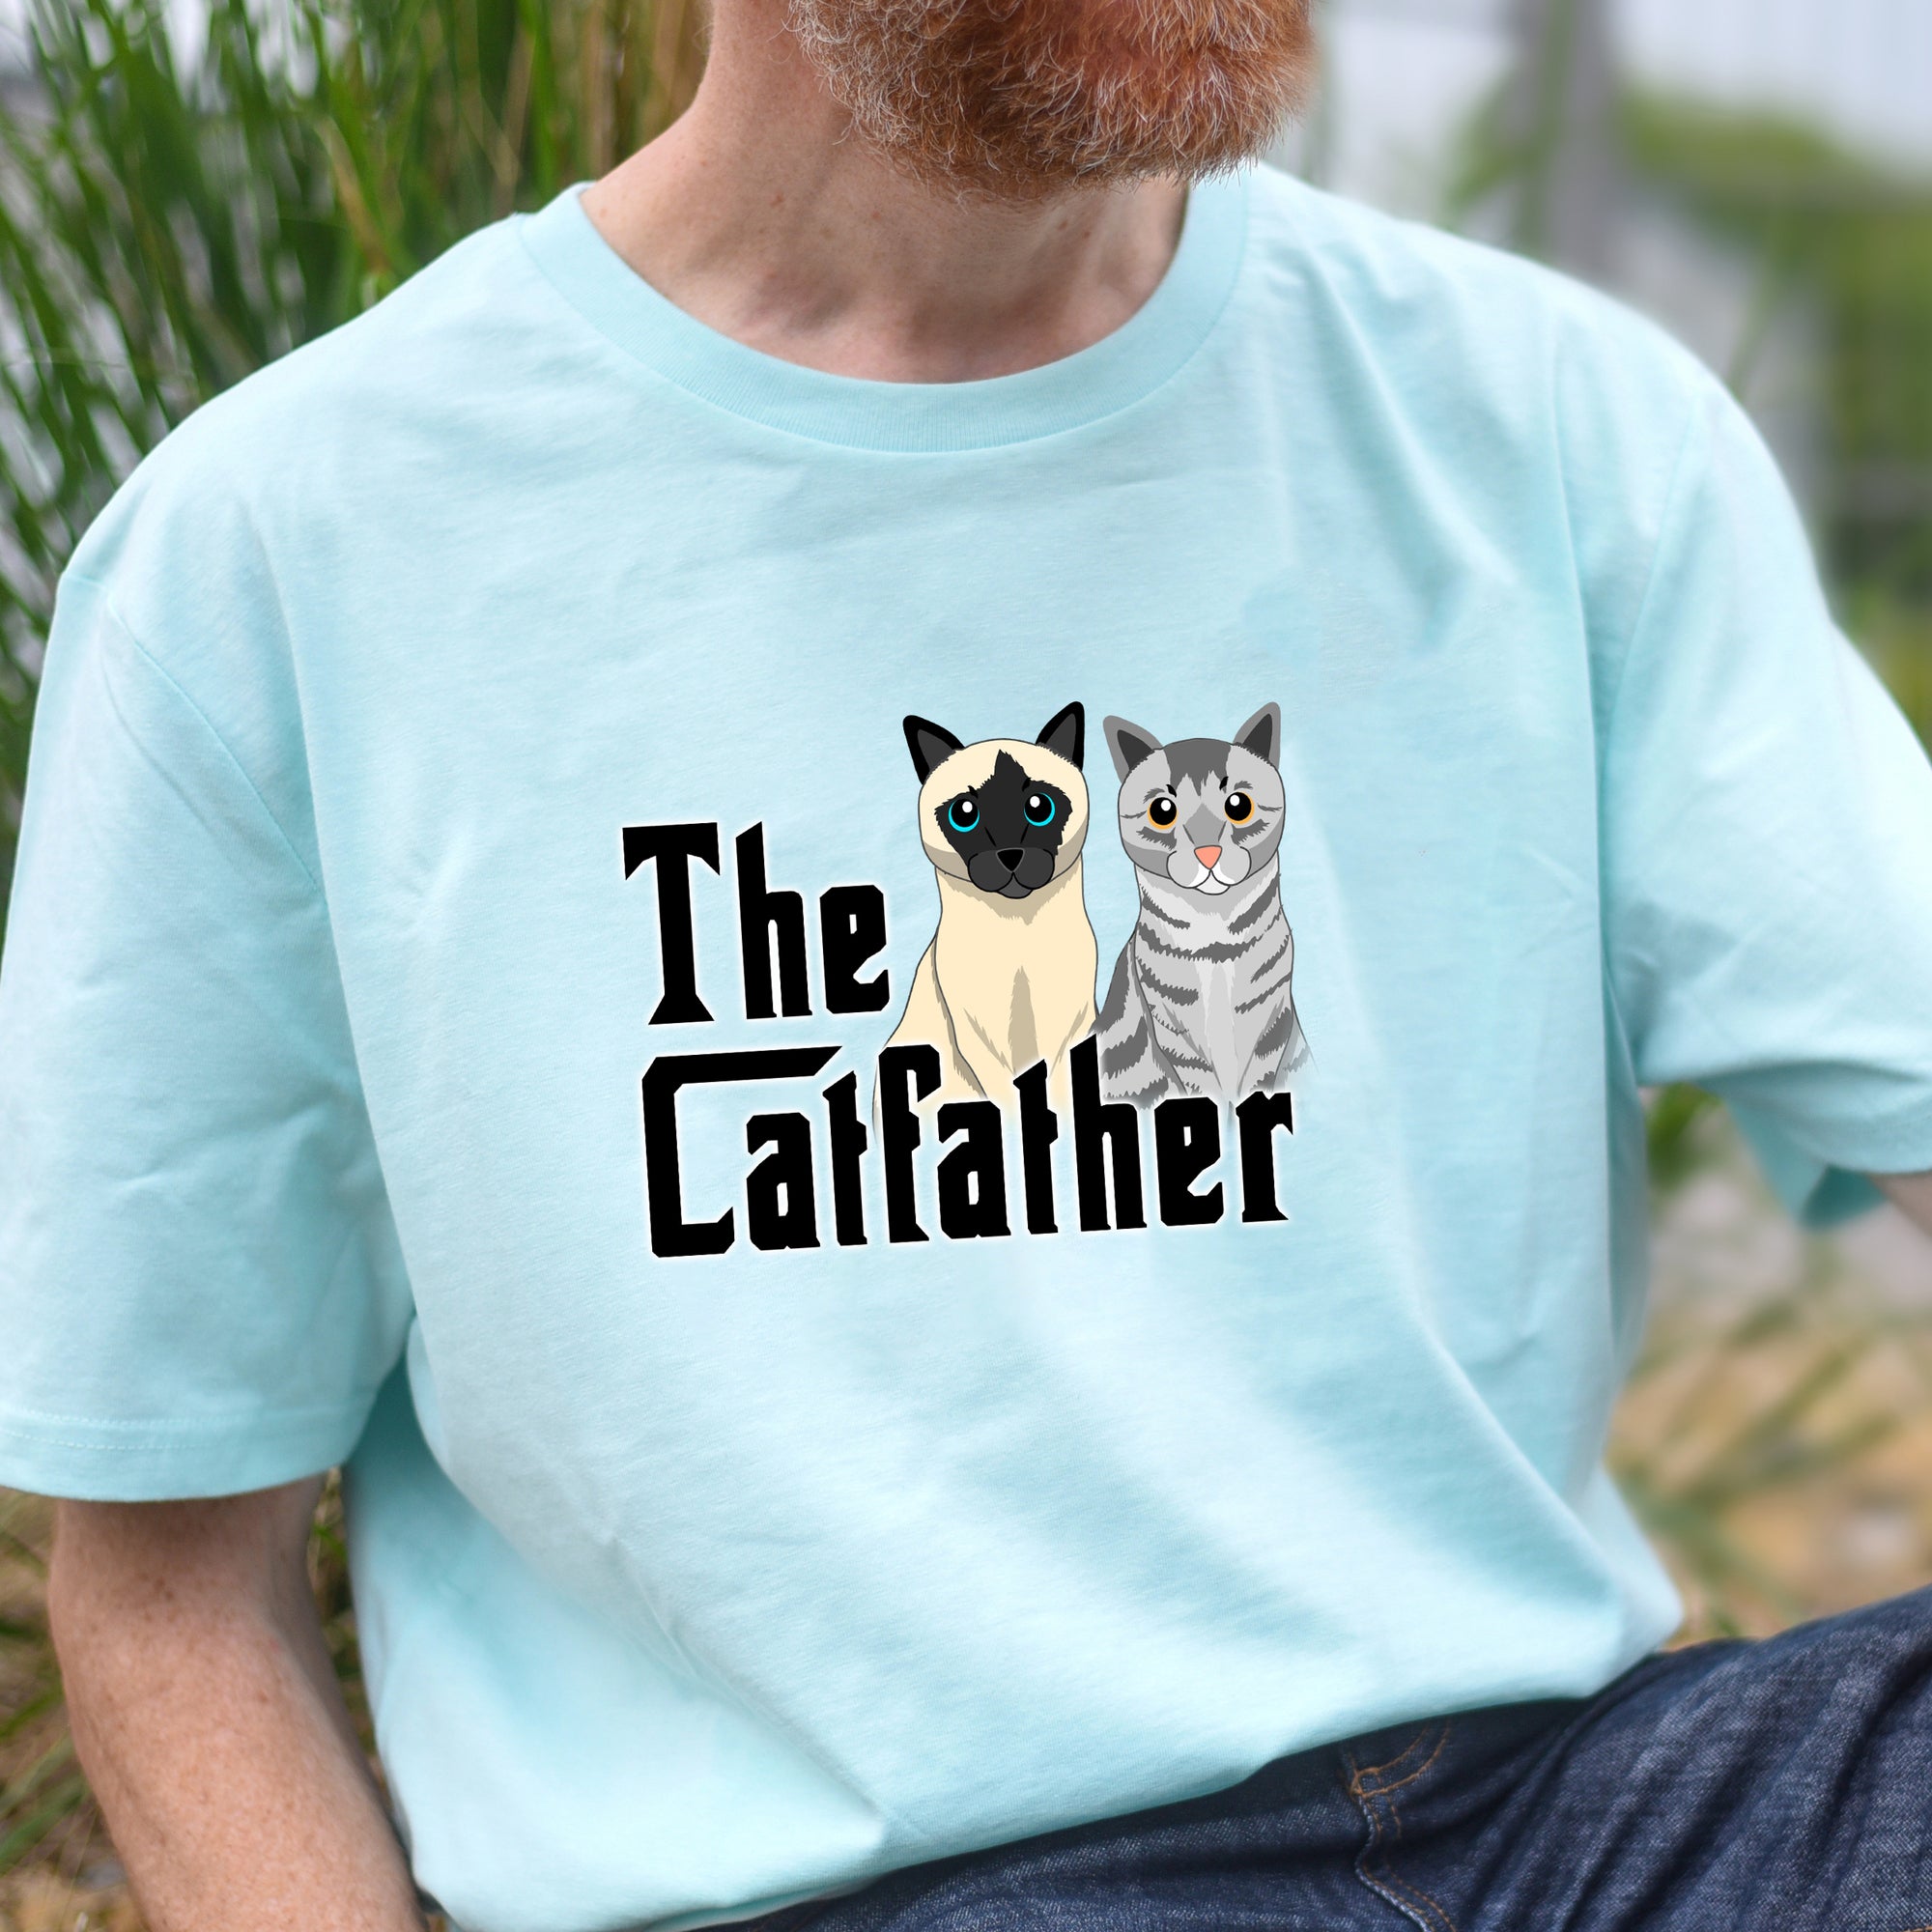 The Catfather Illustrated T-shirt